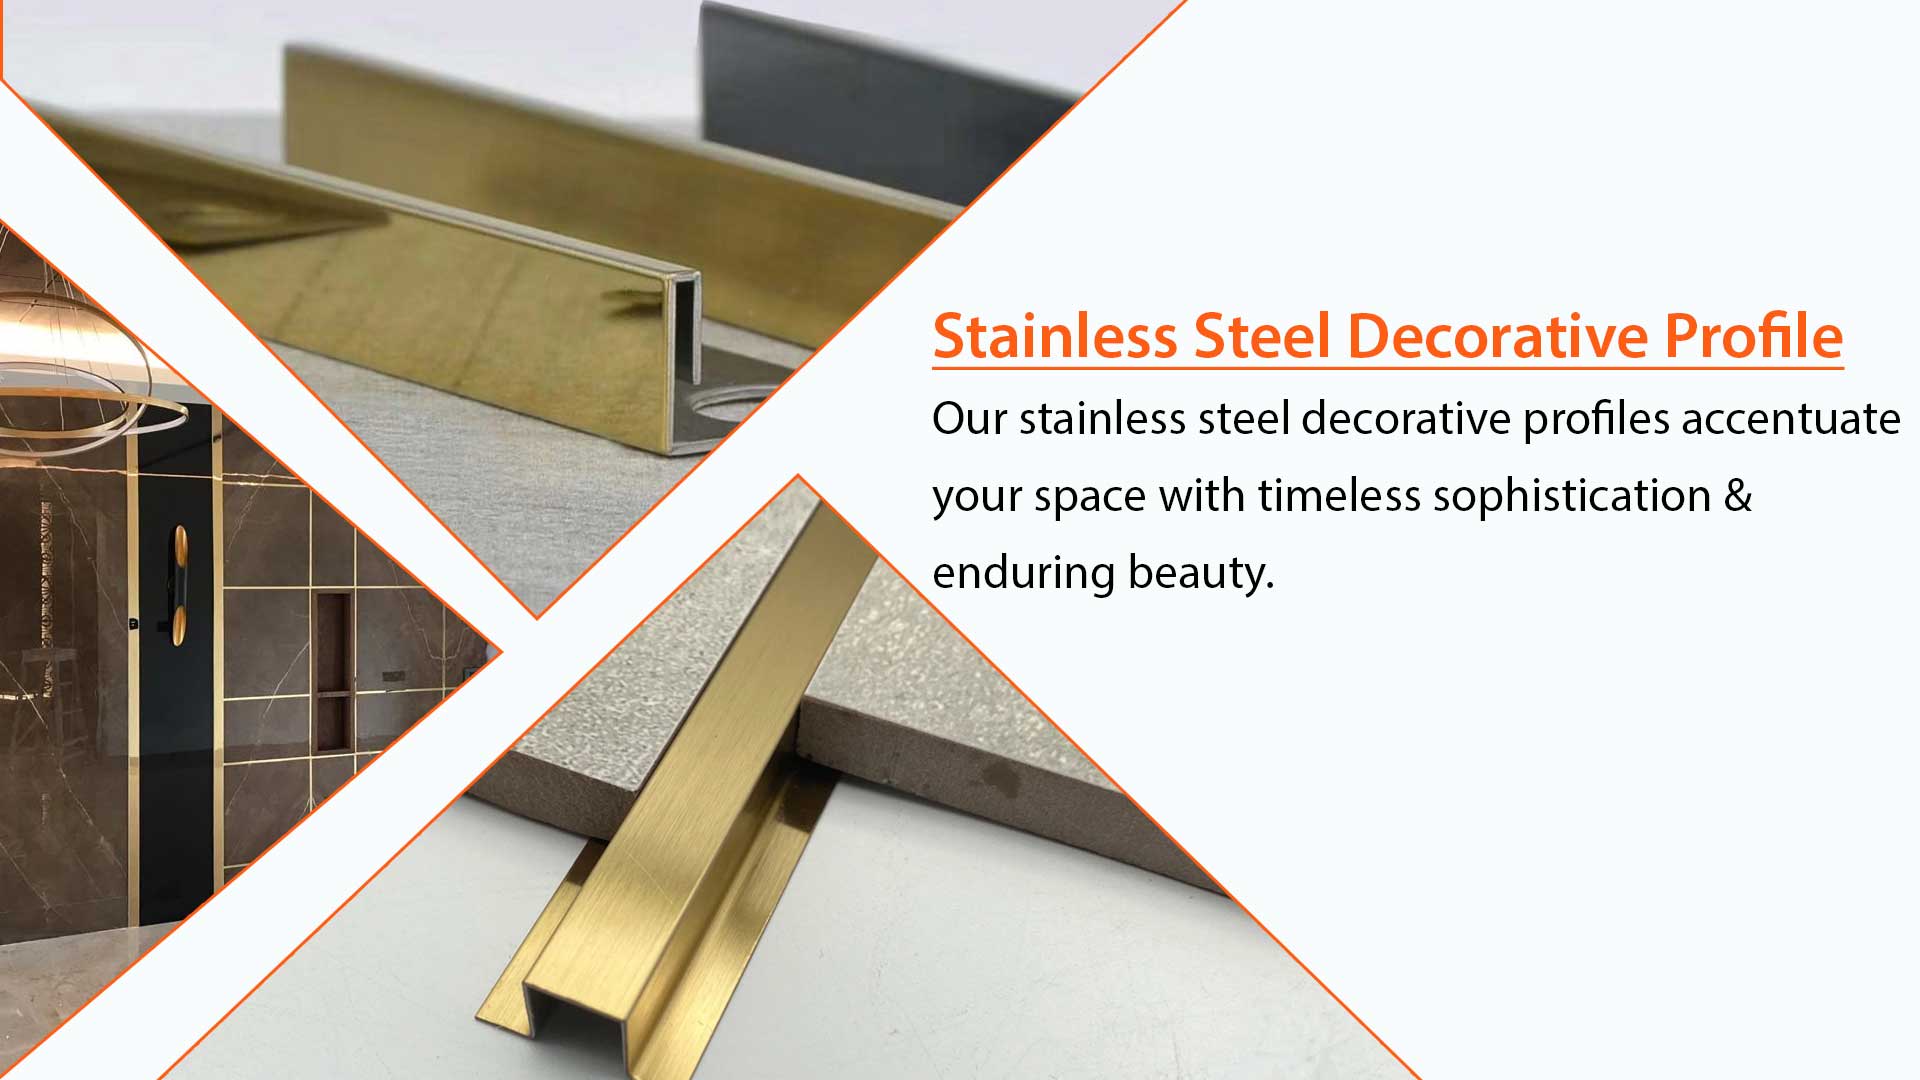 Stainless Steel Decorative Profile in Husnabad